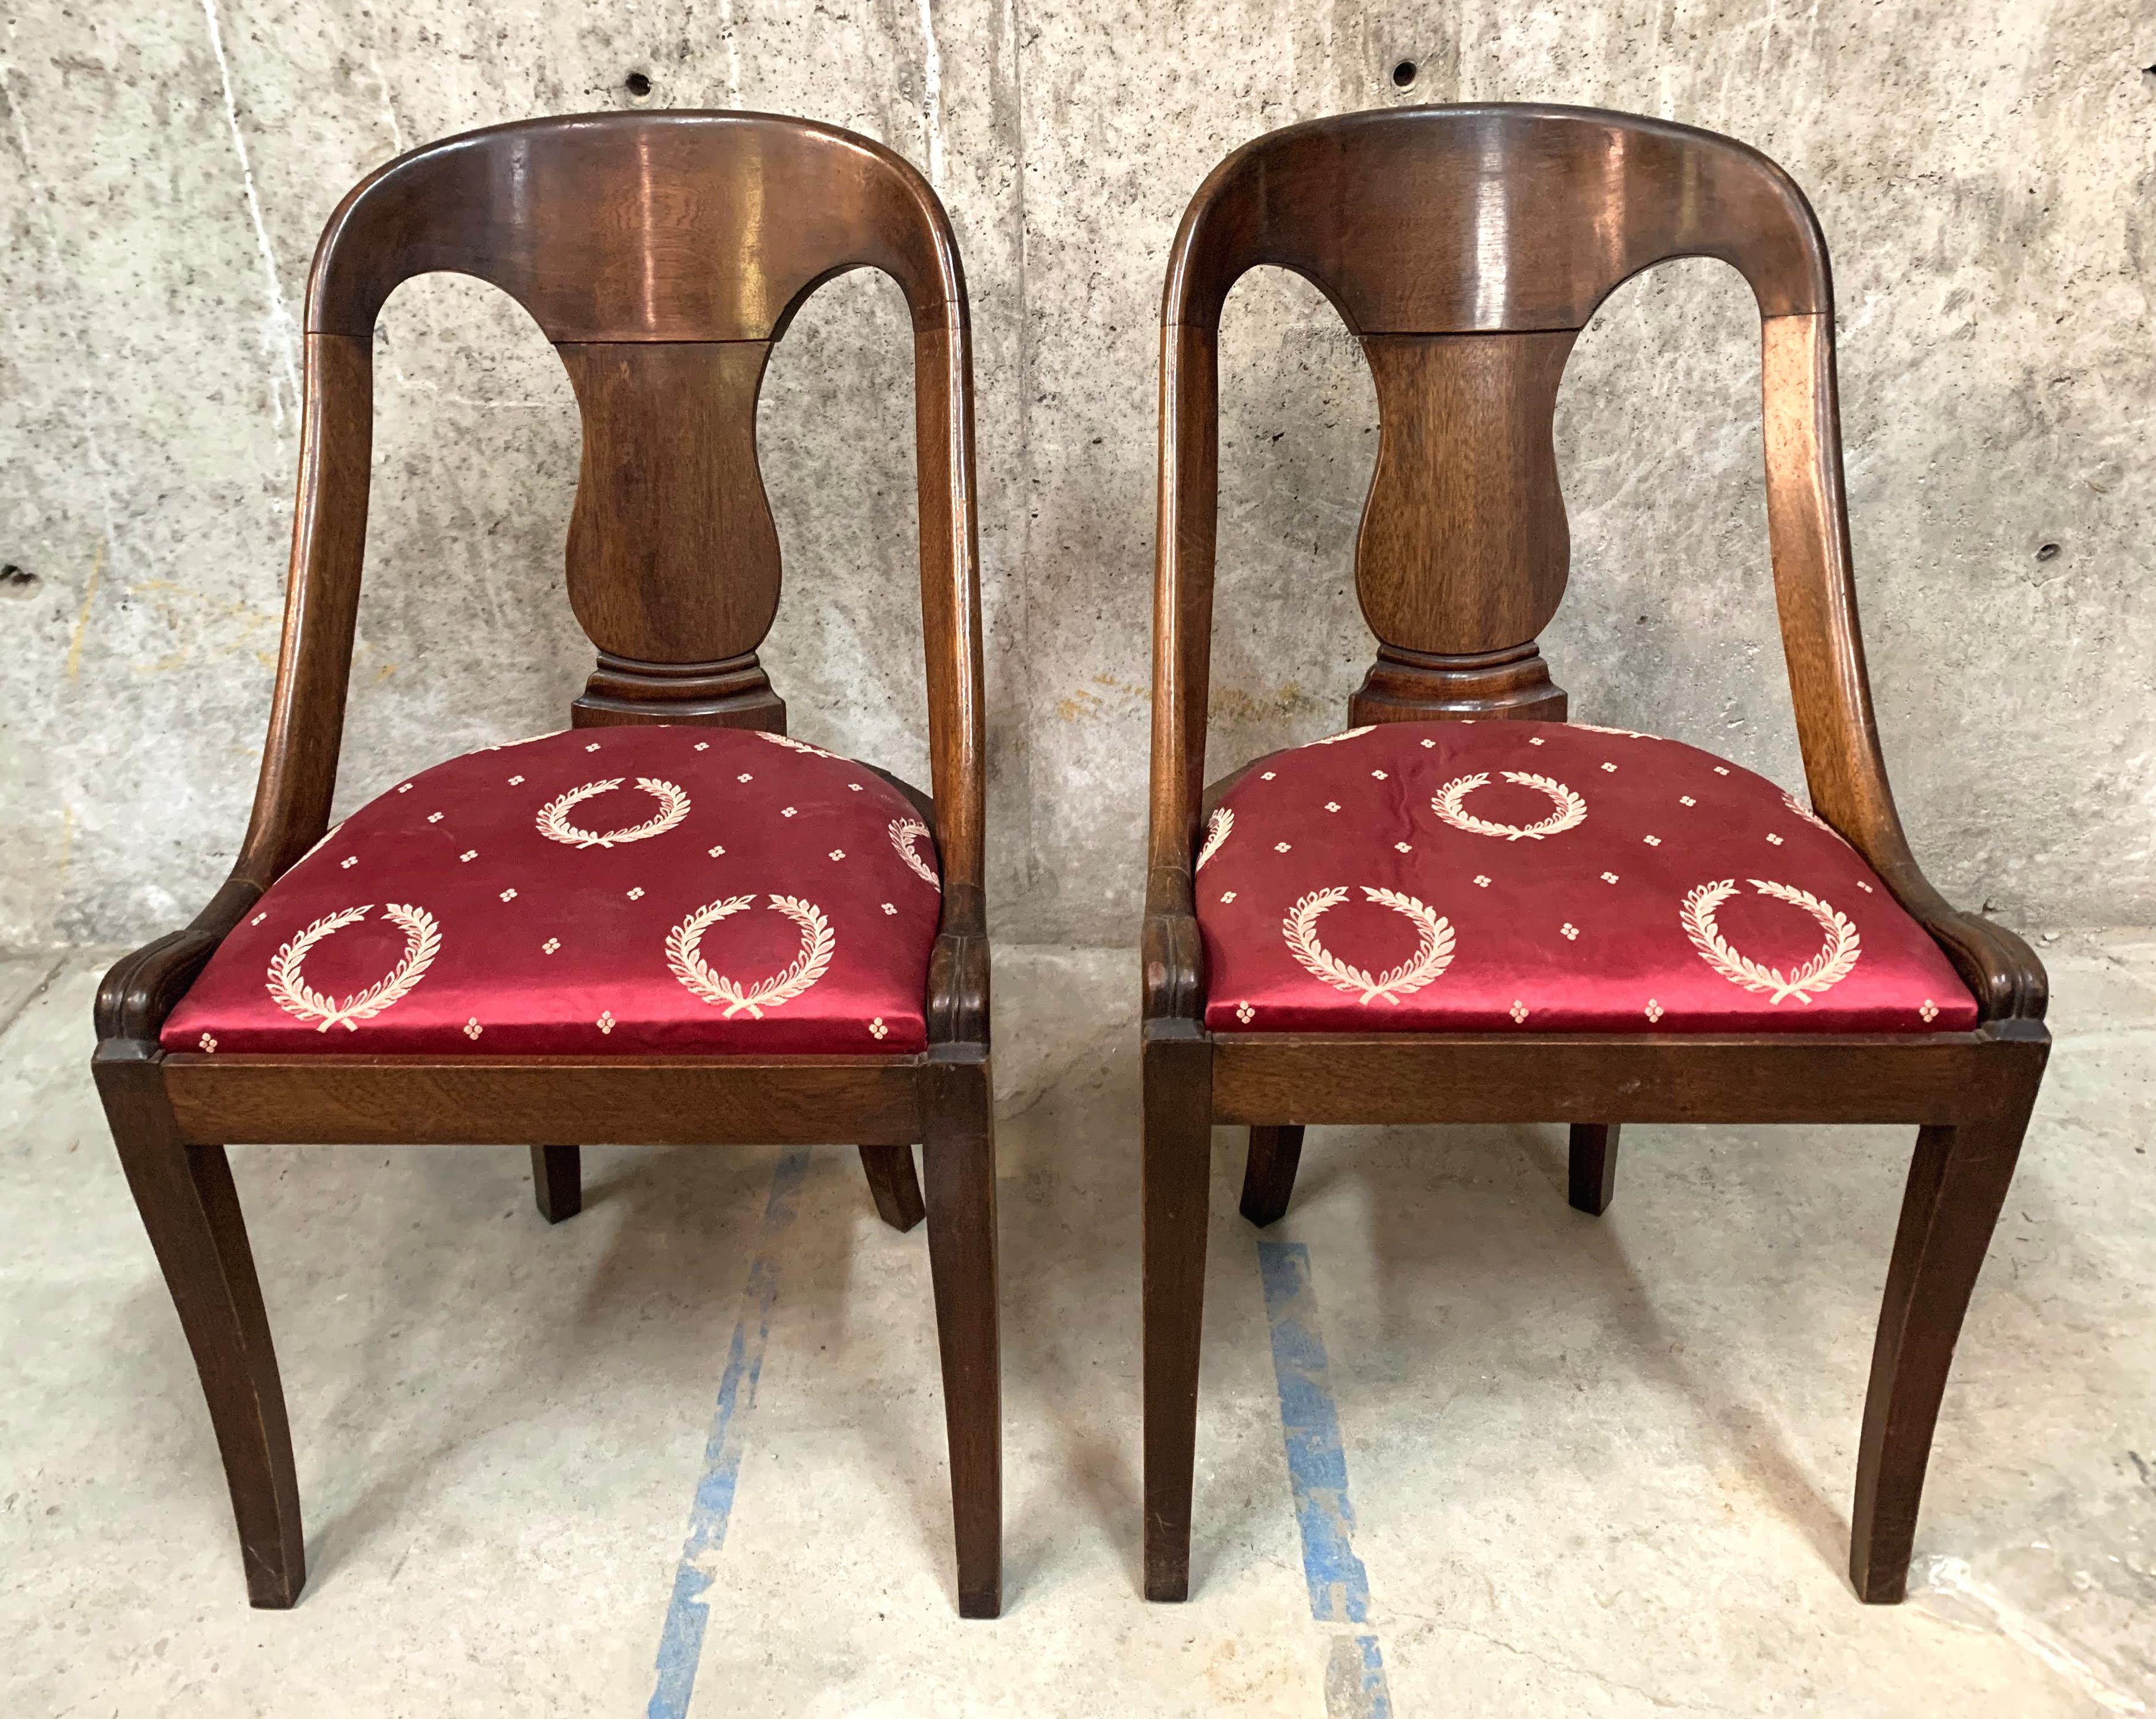 Extraordinary pair of French Empire style mahogany chairs featuring a tub or gondola form frame. Minimally decorated having a curved back, vasiform back splat surmounted by a curved crest rail. Gracefully curved back supports conjoined to a red silk